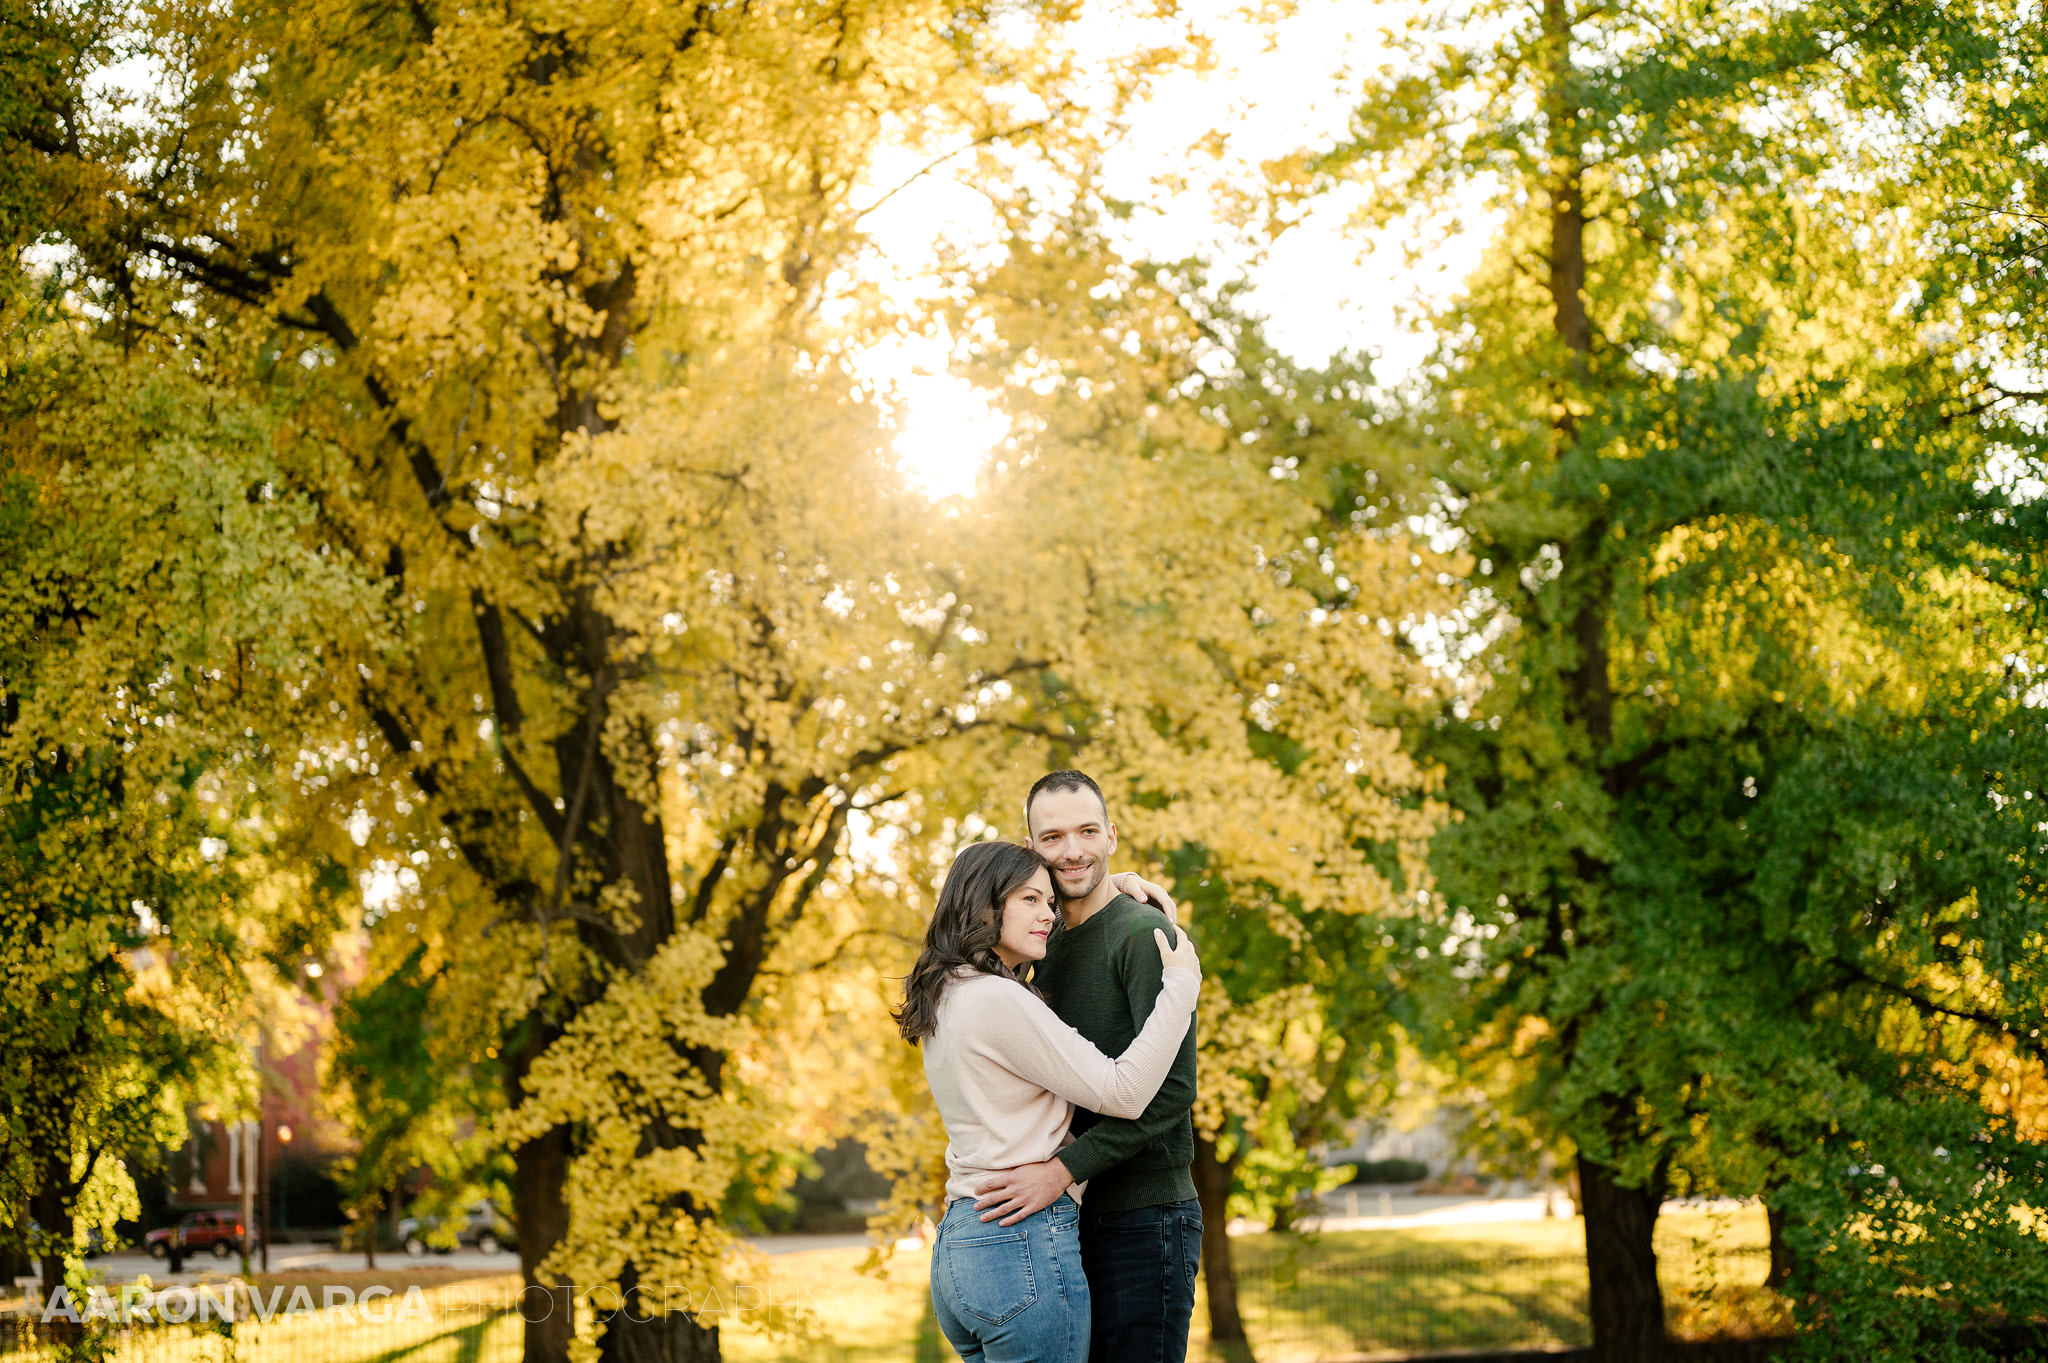 02 allegheny commons park engagement - Sarah + Alex | North Side and North Shore Engagement Photos